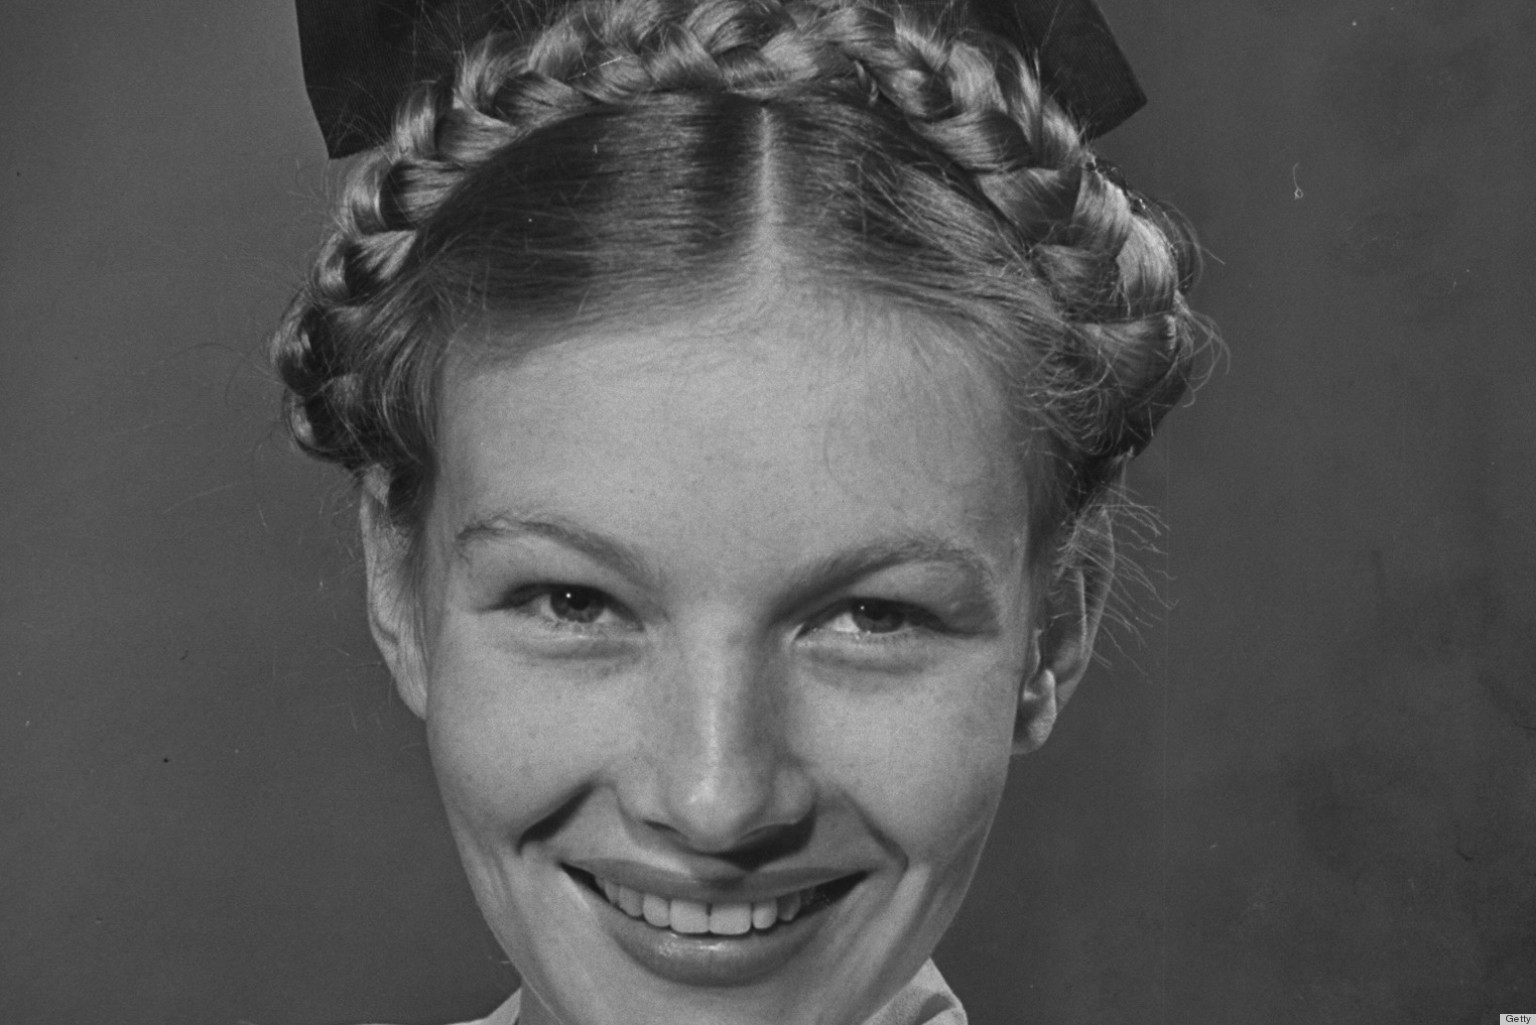 Braids Throughout History The Highs And Lows Of This